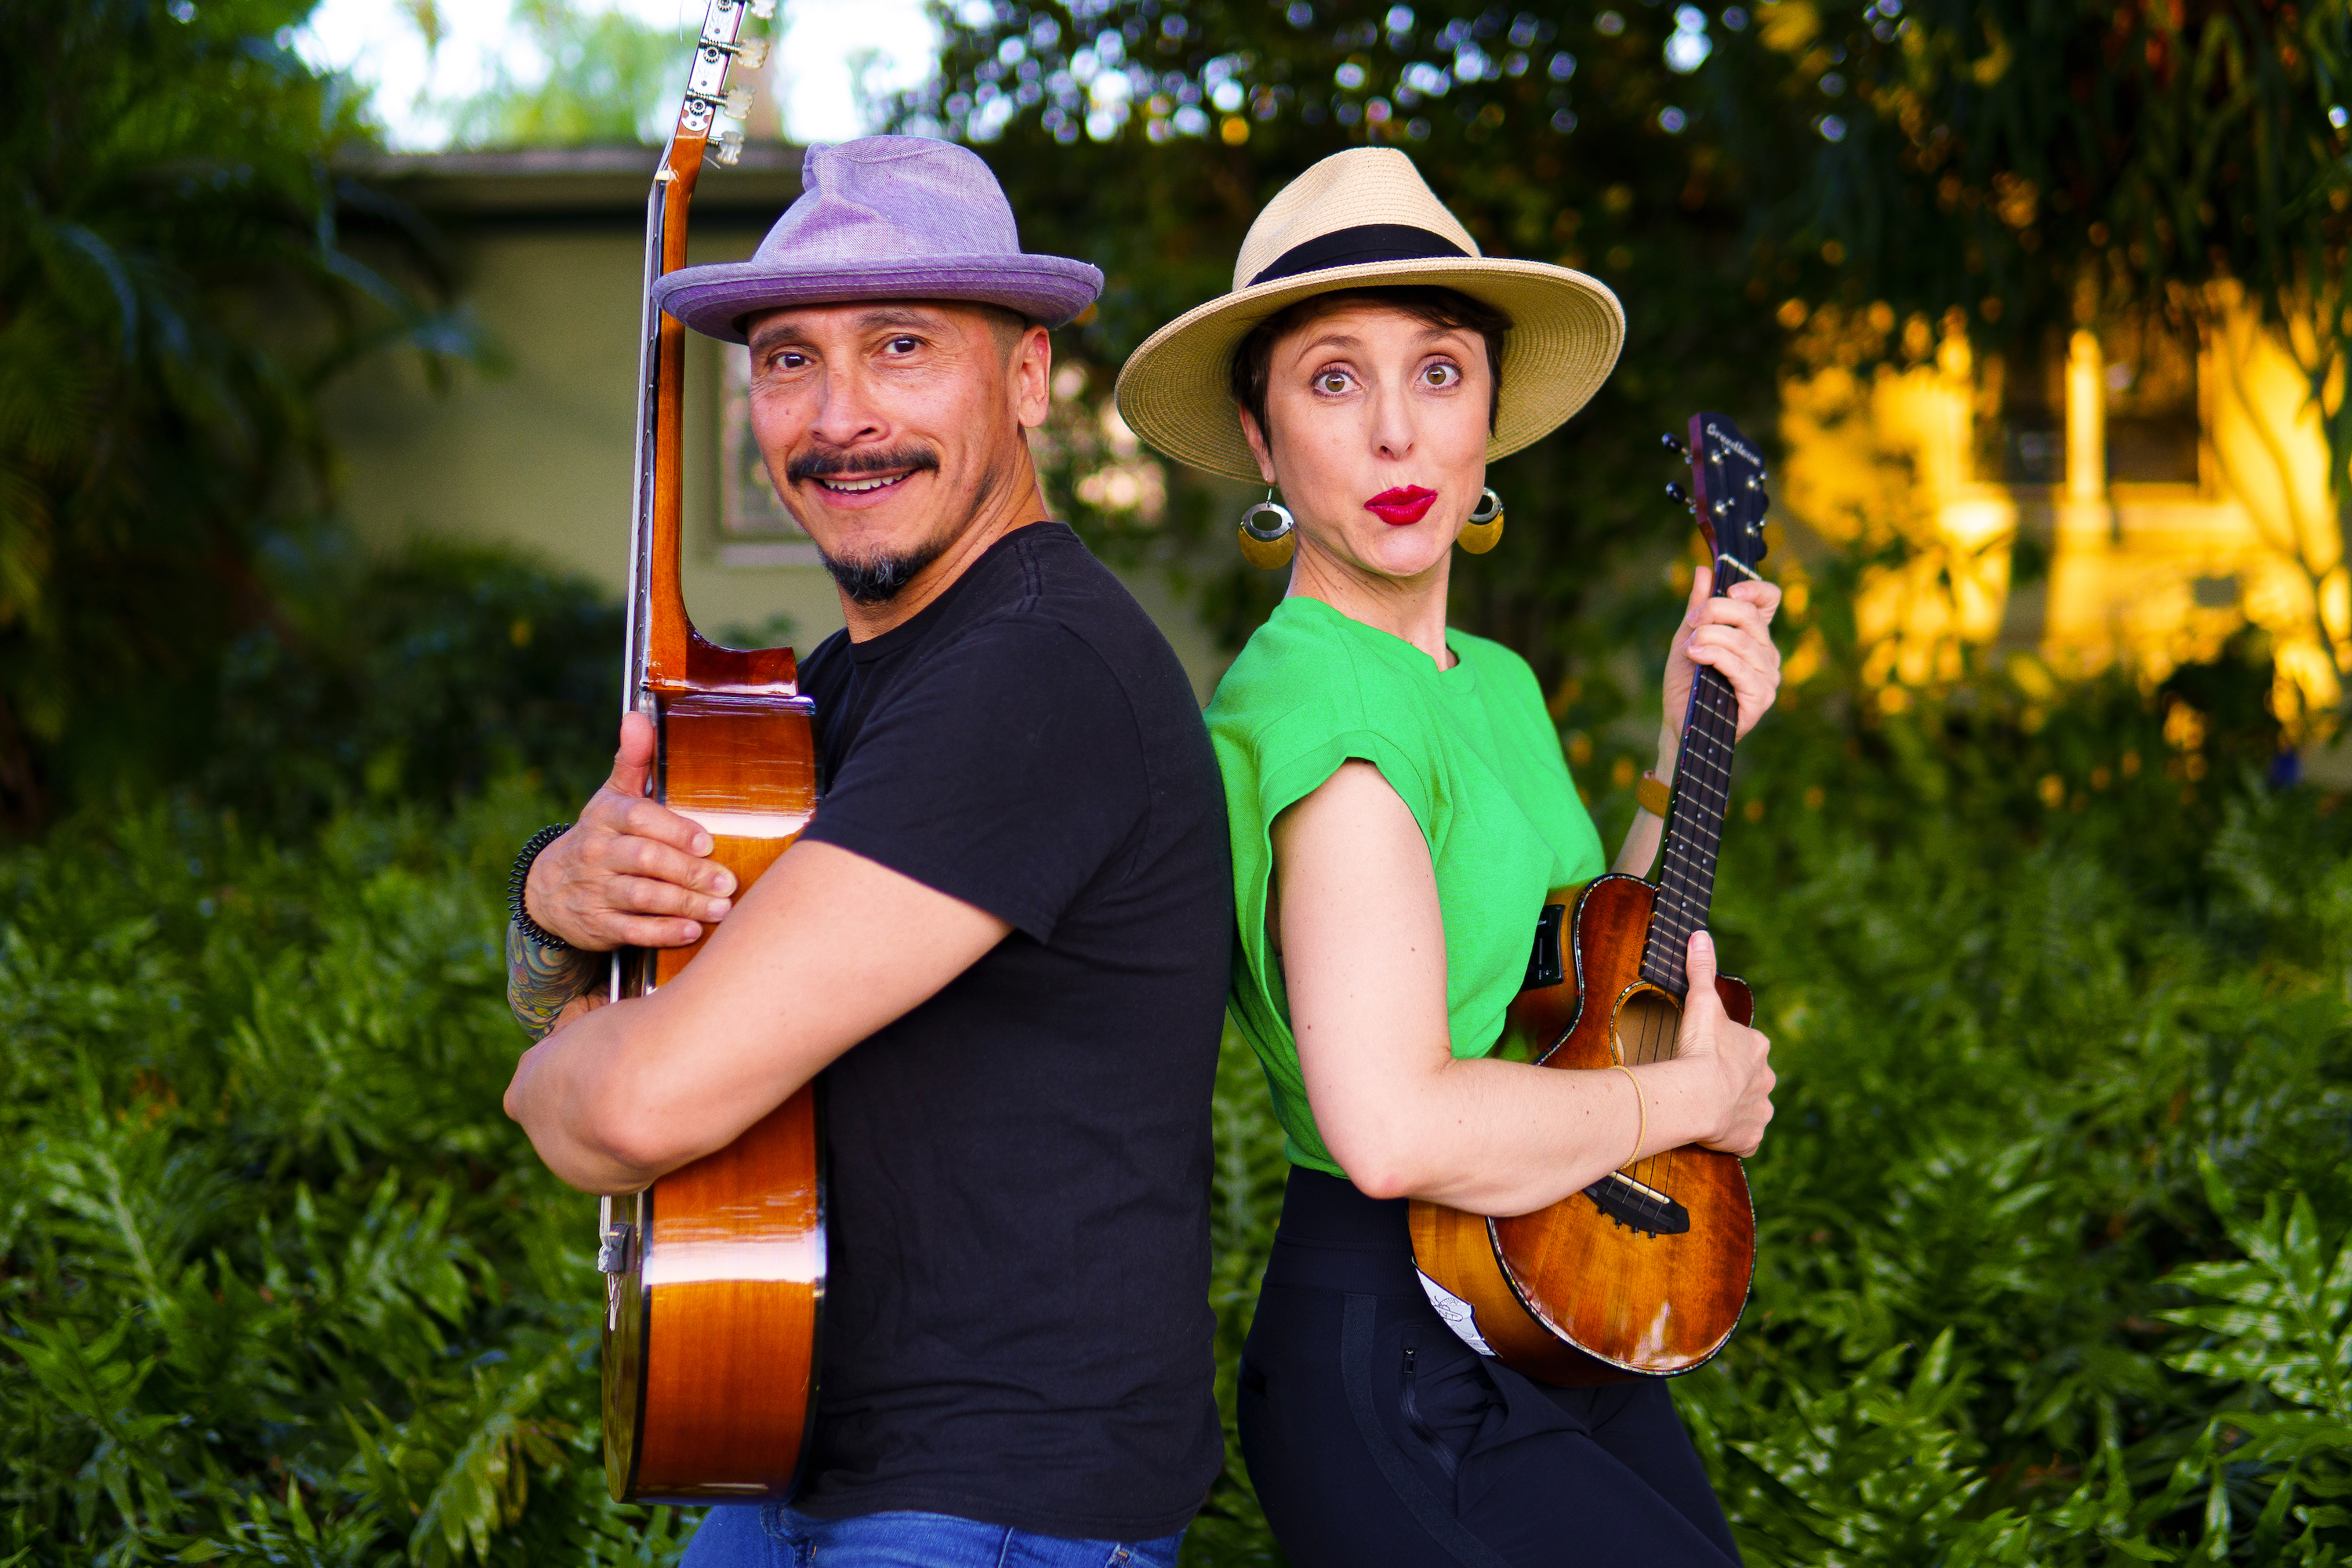 Alina in green shirt and hat and Hamlet in blue t-shirt and hat holding guitars